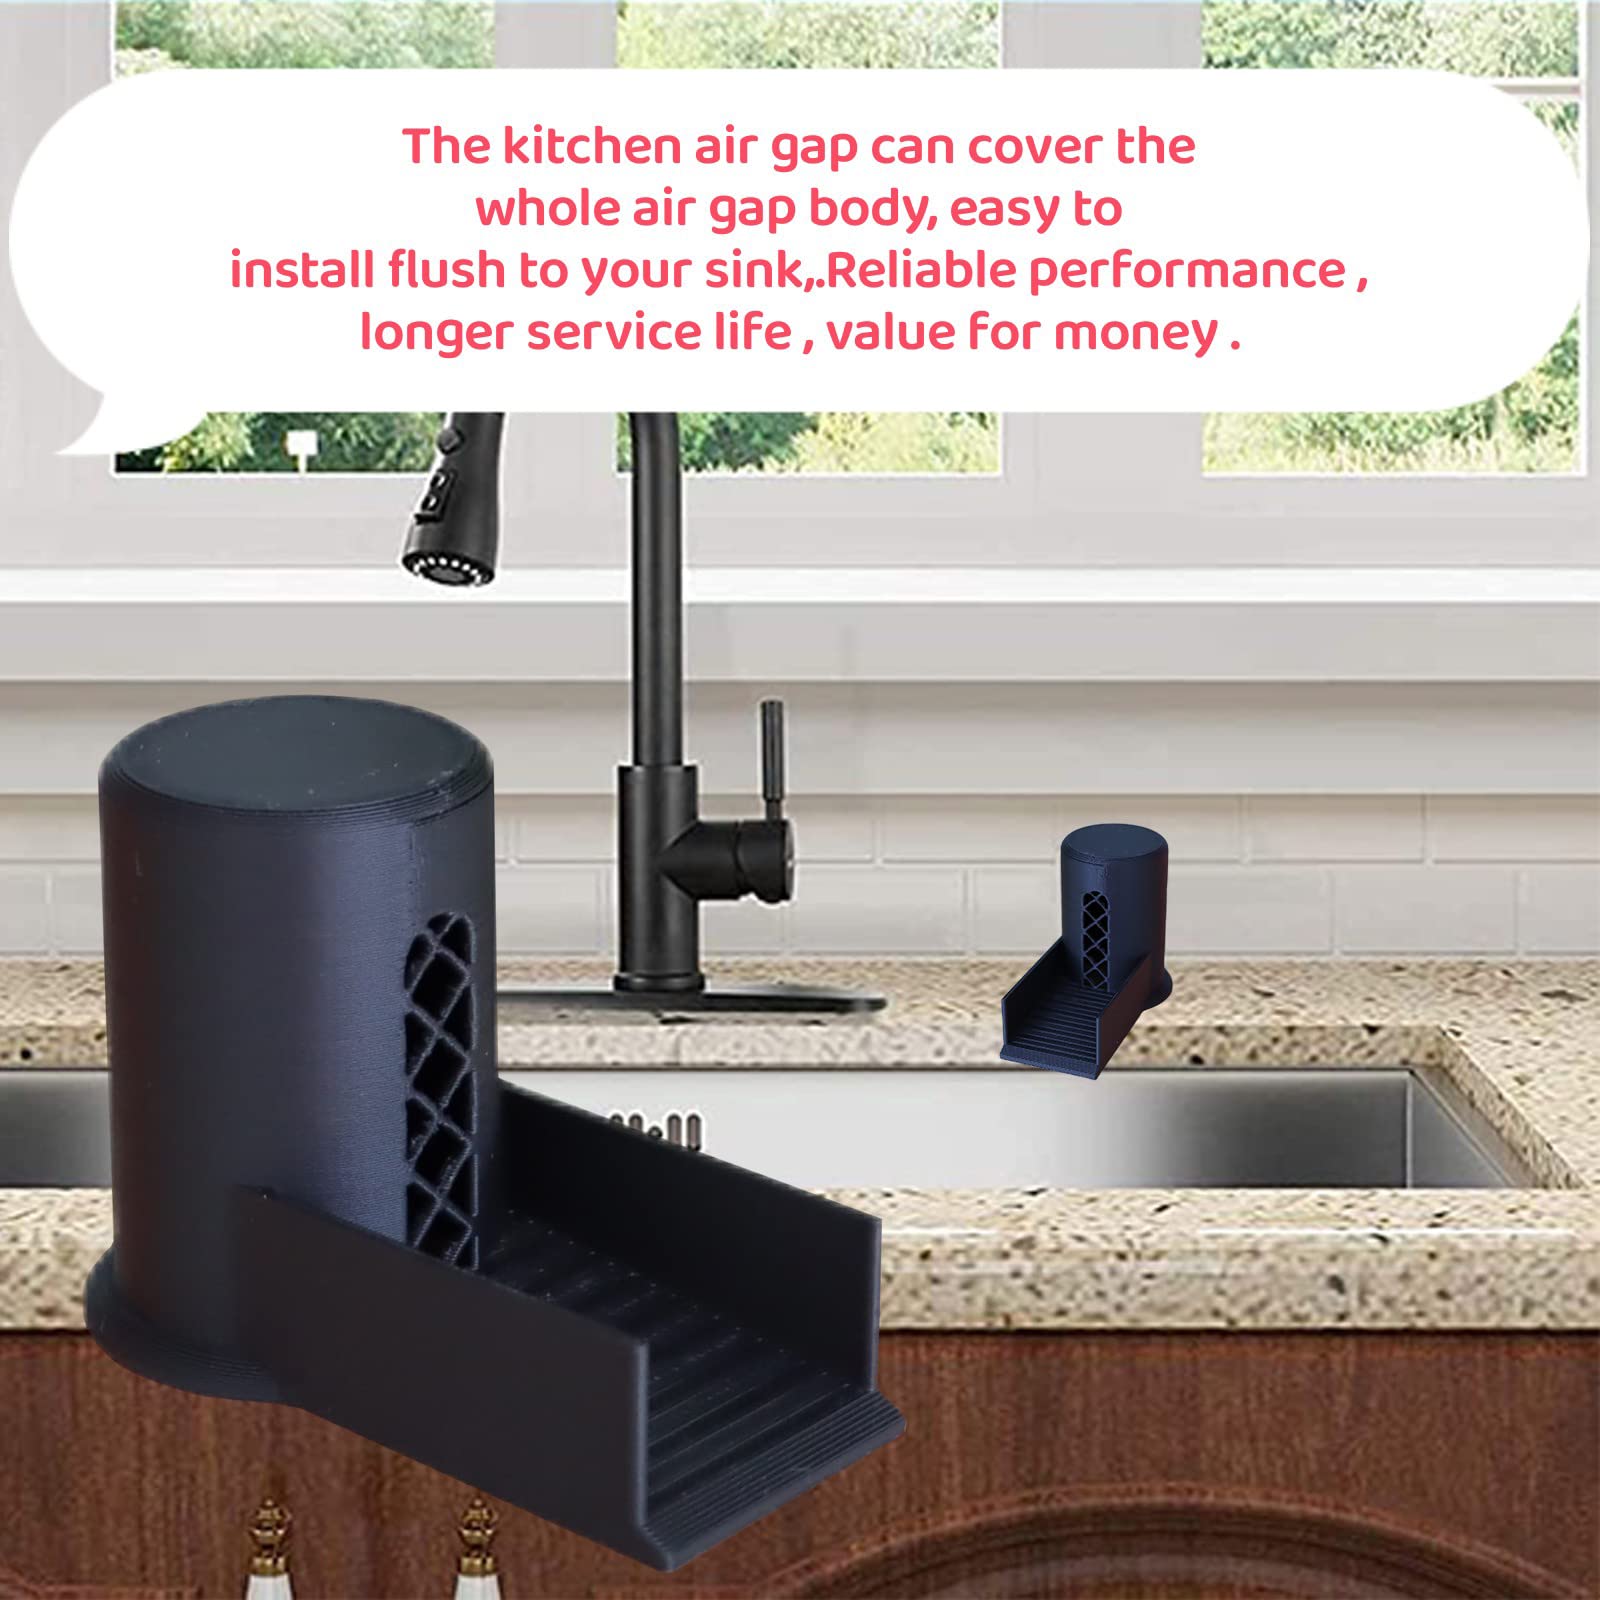 TEYOUYI Dishwasher Air Gap Cover with Ramp, Replacement Air Gap for Dishwasher,Accessories for Dishwasher Air Gap Overflow Spout Extender for Dishwasher,Black